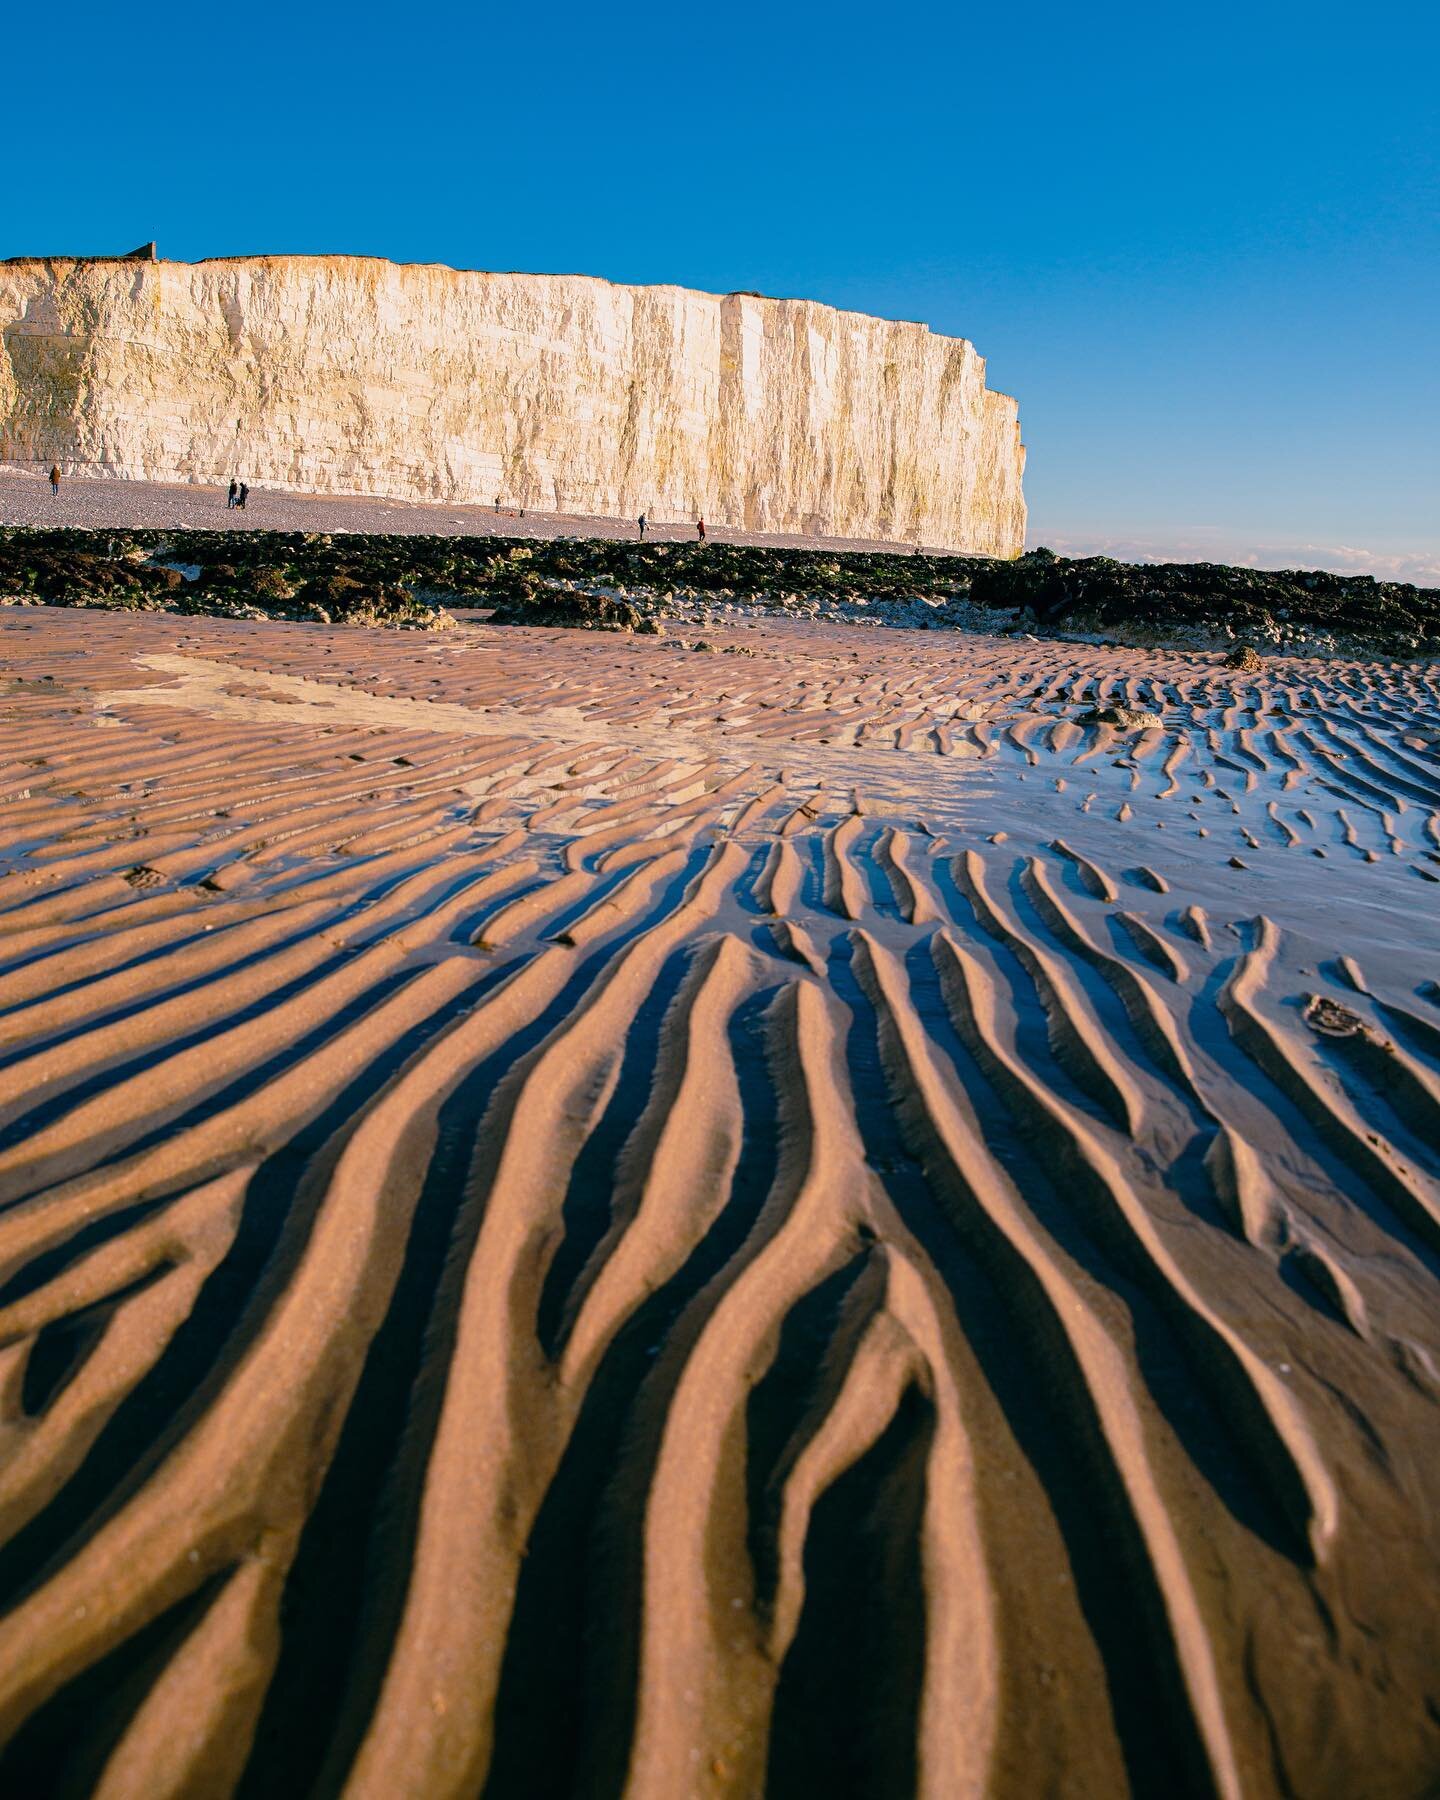 Hey all. I hope you like this last  set of pics all taken between Birling Gap and just past the lighthouse. Last push to get a few more to join me this Sunday to walk this glorious route along the coast before a stunning sunset finale on the beach. 5